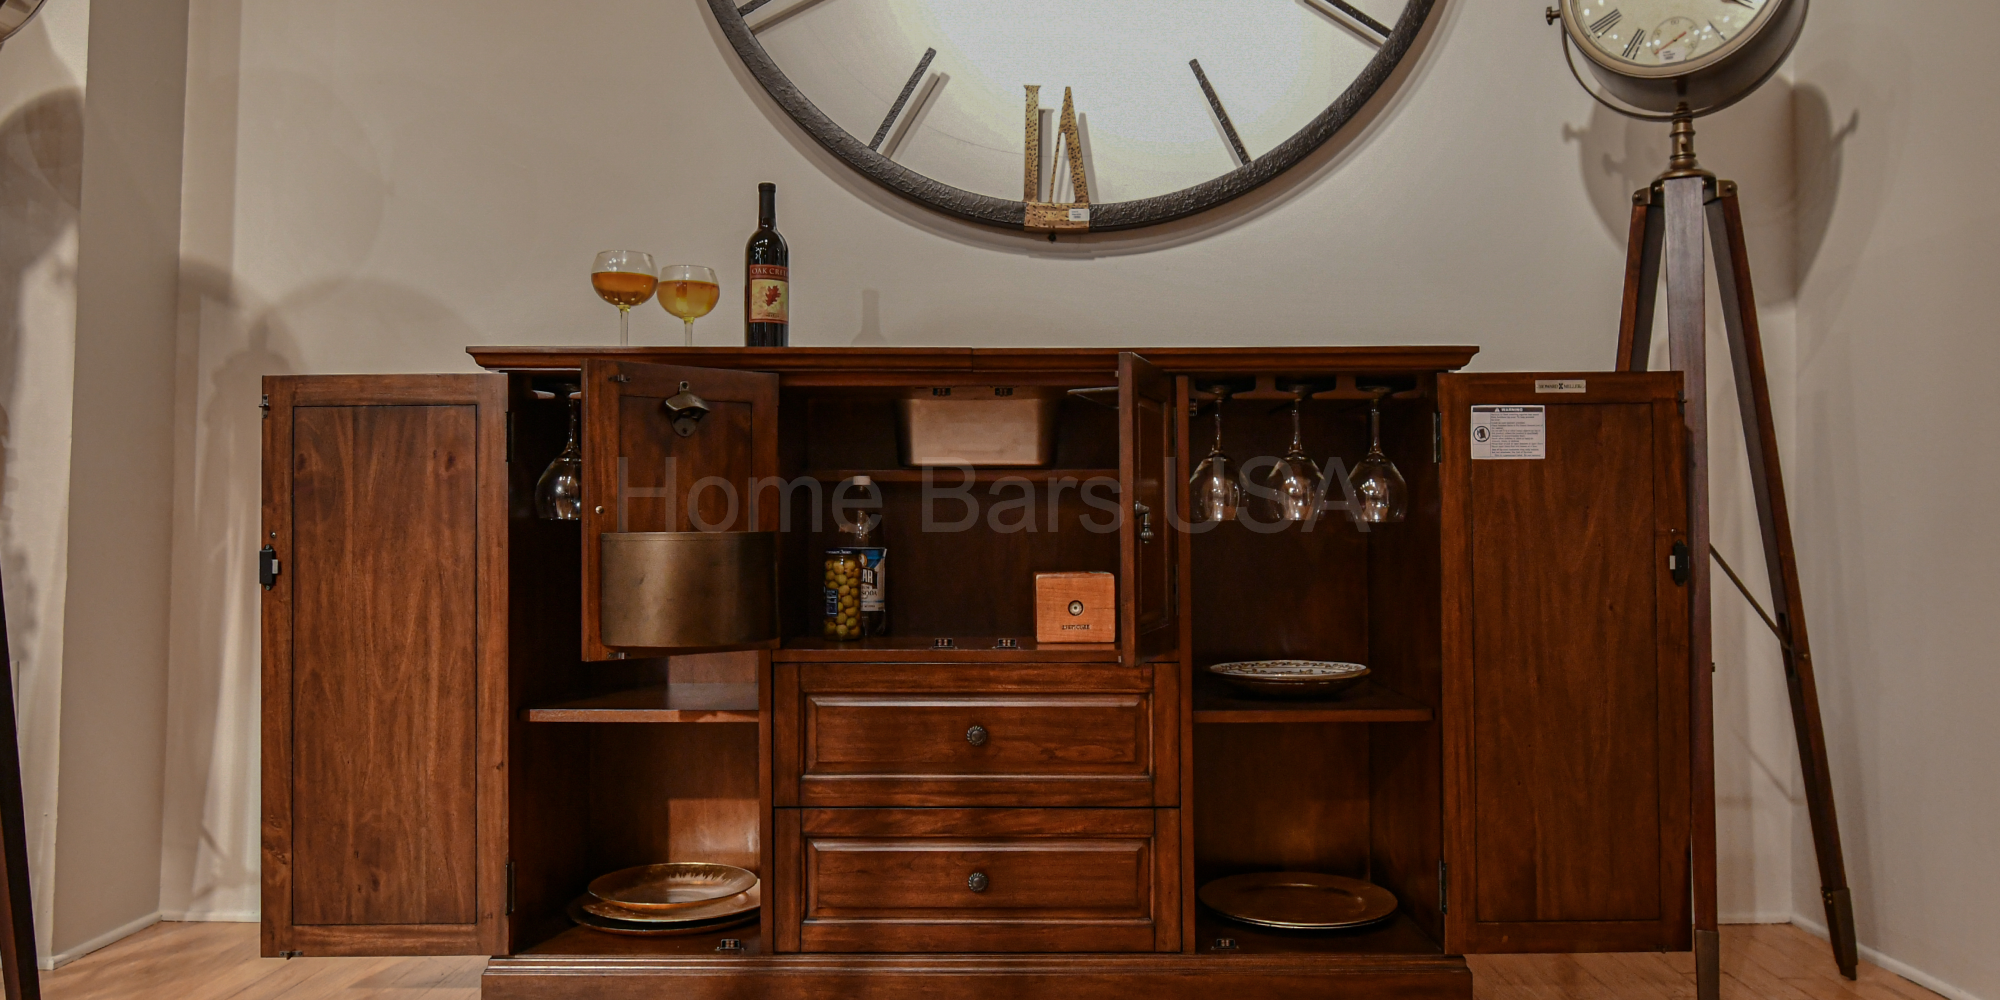 What are the Most Popular Designs of Corner Home Bars?